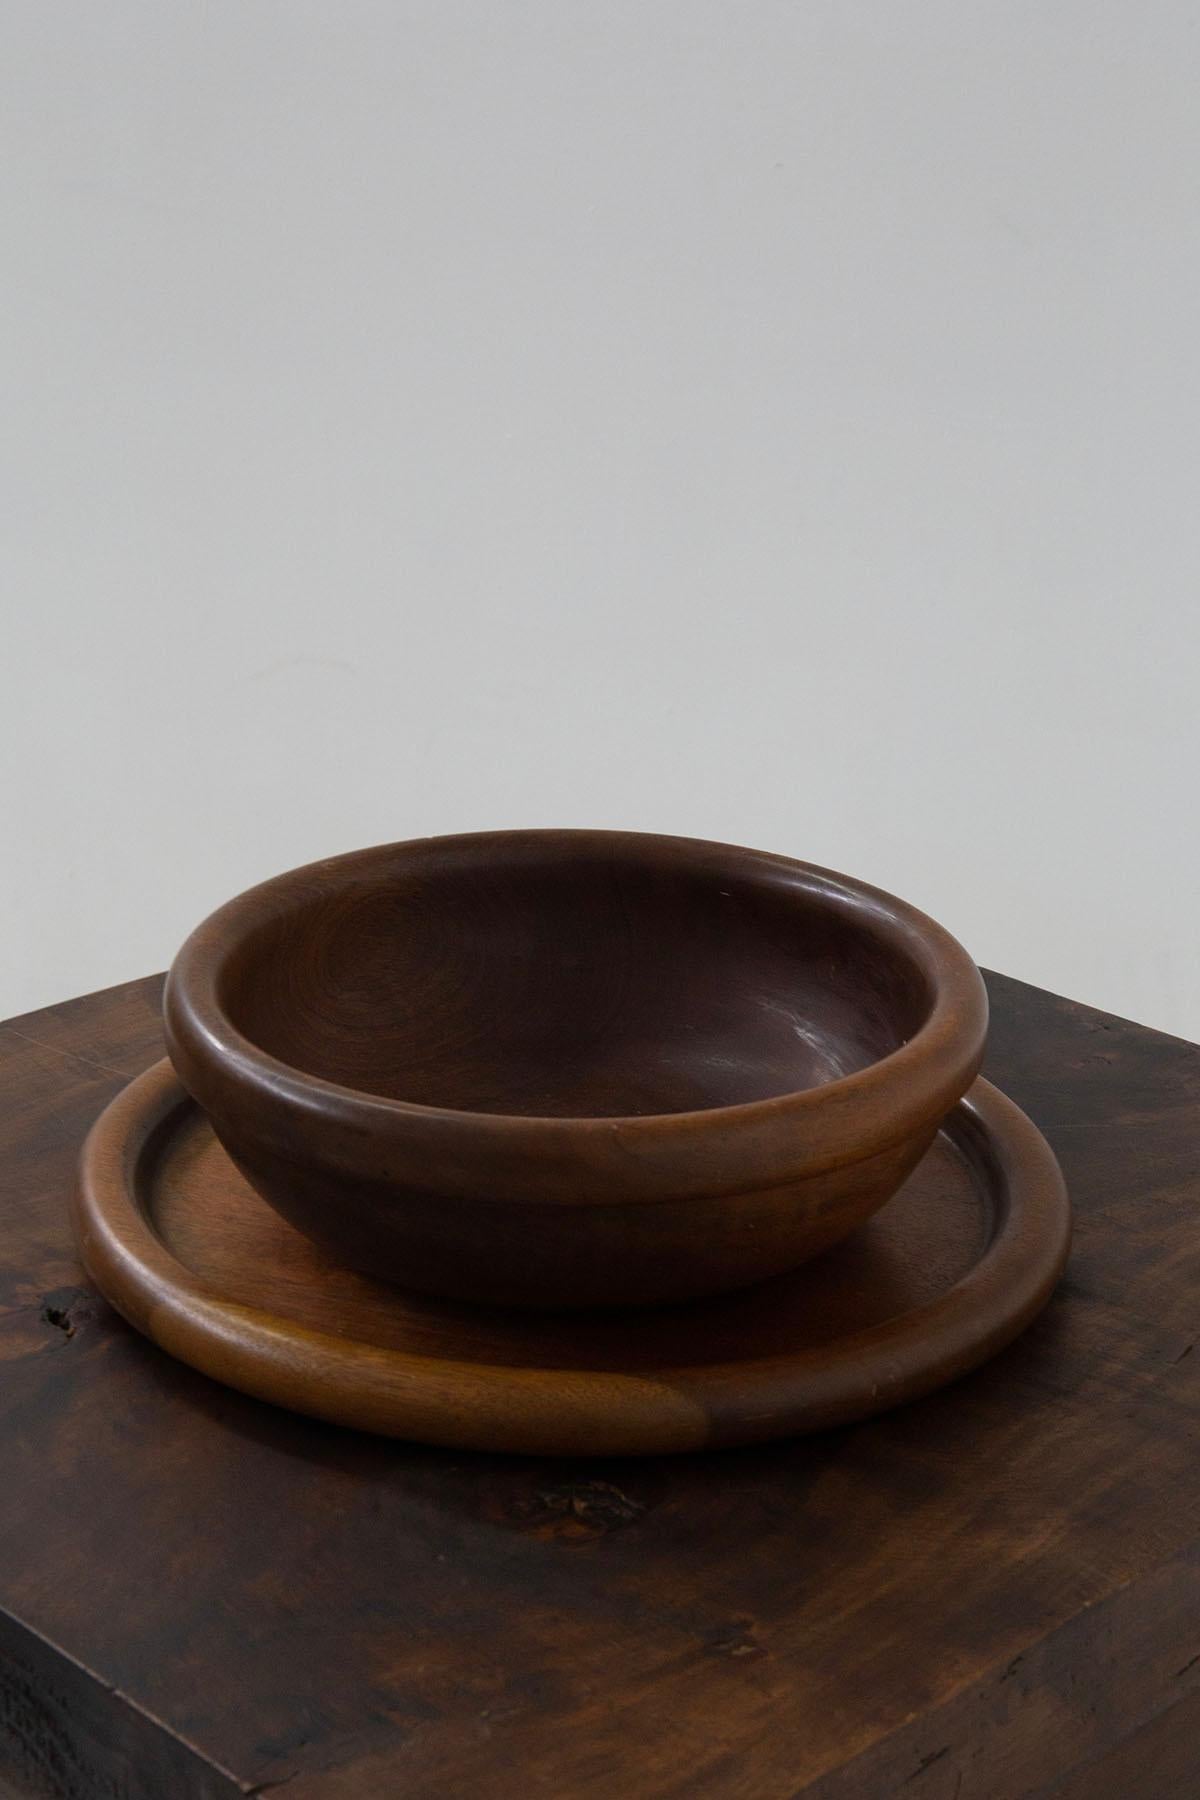 Late 20th Century Italian Decorative Wooden Bowls by by Ingo Knuth for DMK Daniela Mola, Label